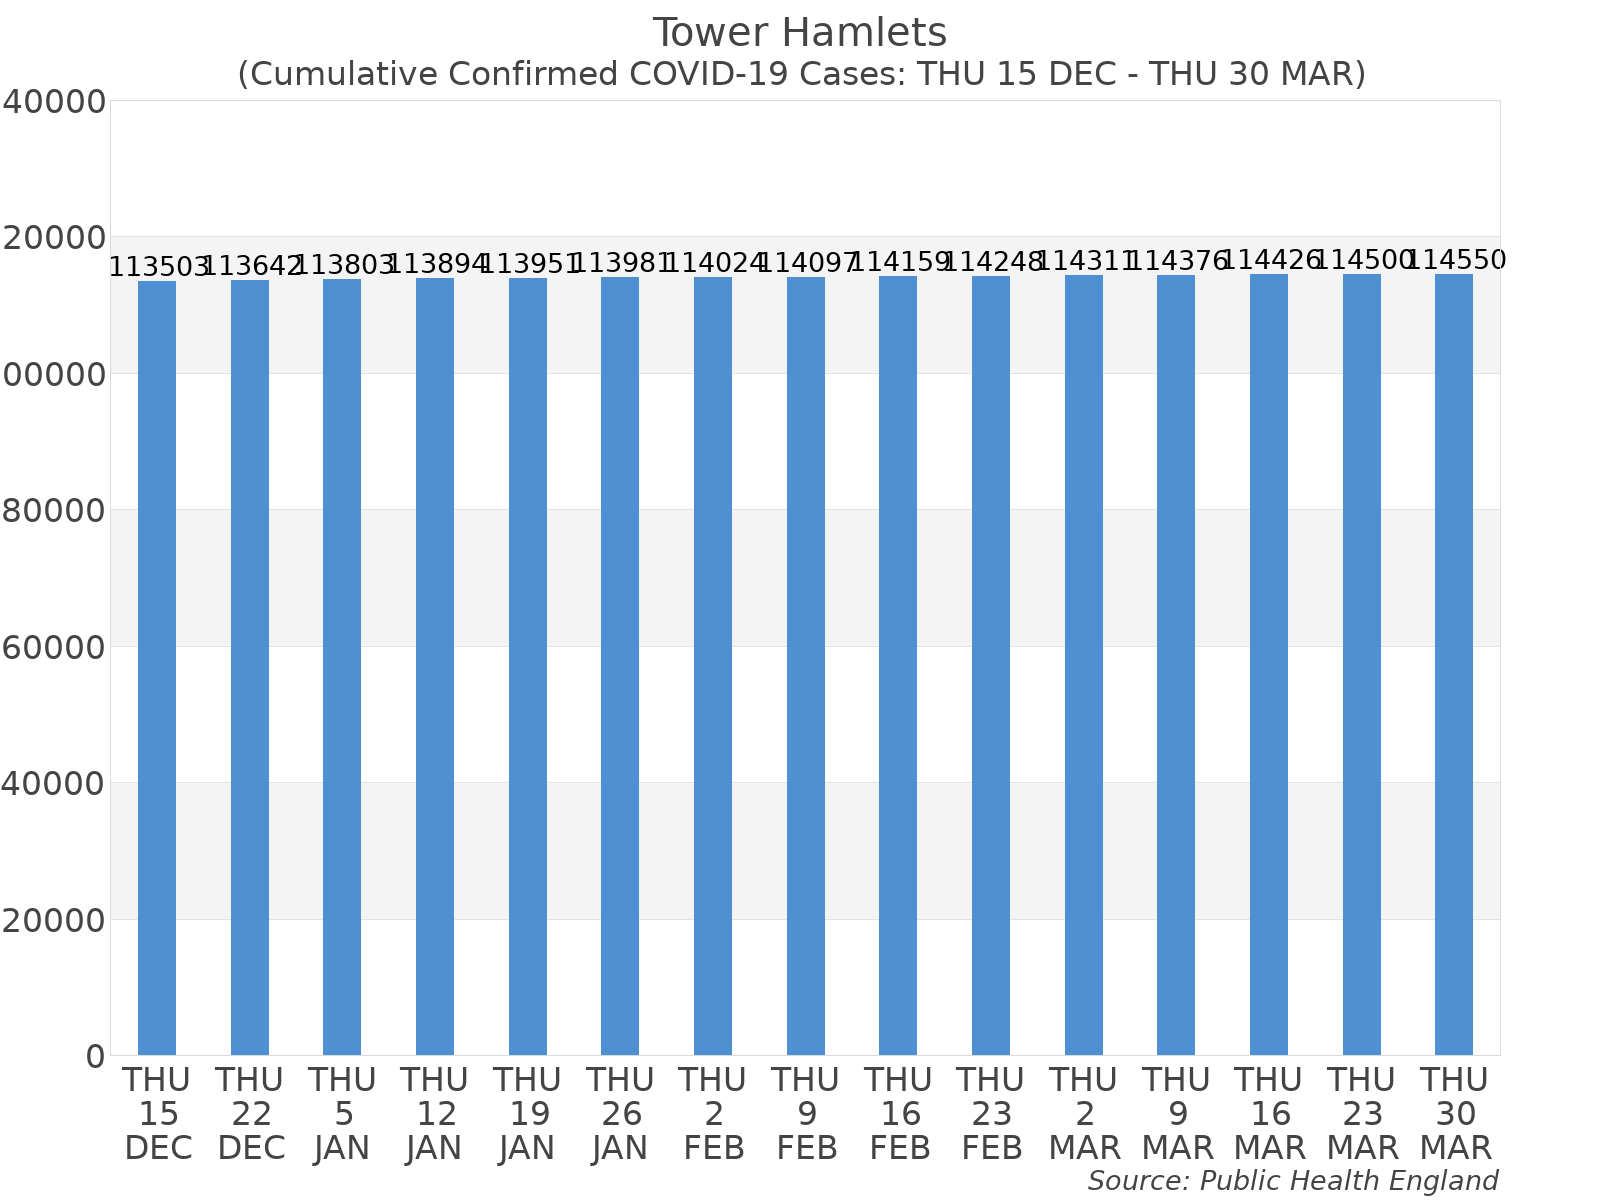 Graph tracking the number of confirmed coronavirus (COVID-19) cases where the patient lives within the Tower Hamlets Upper Tier Local Authority Area.